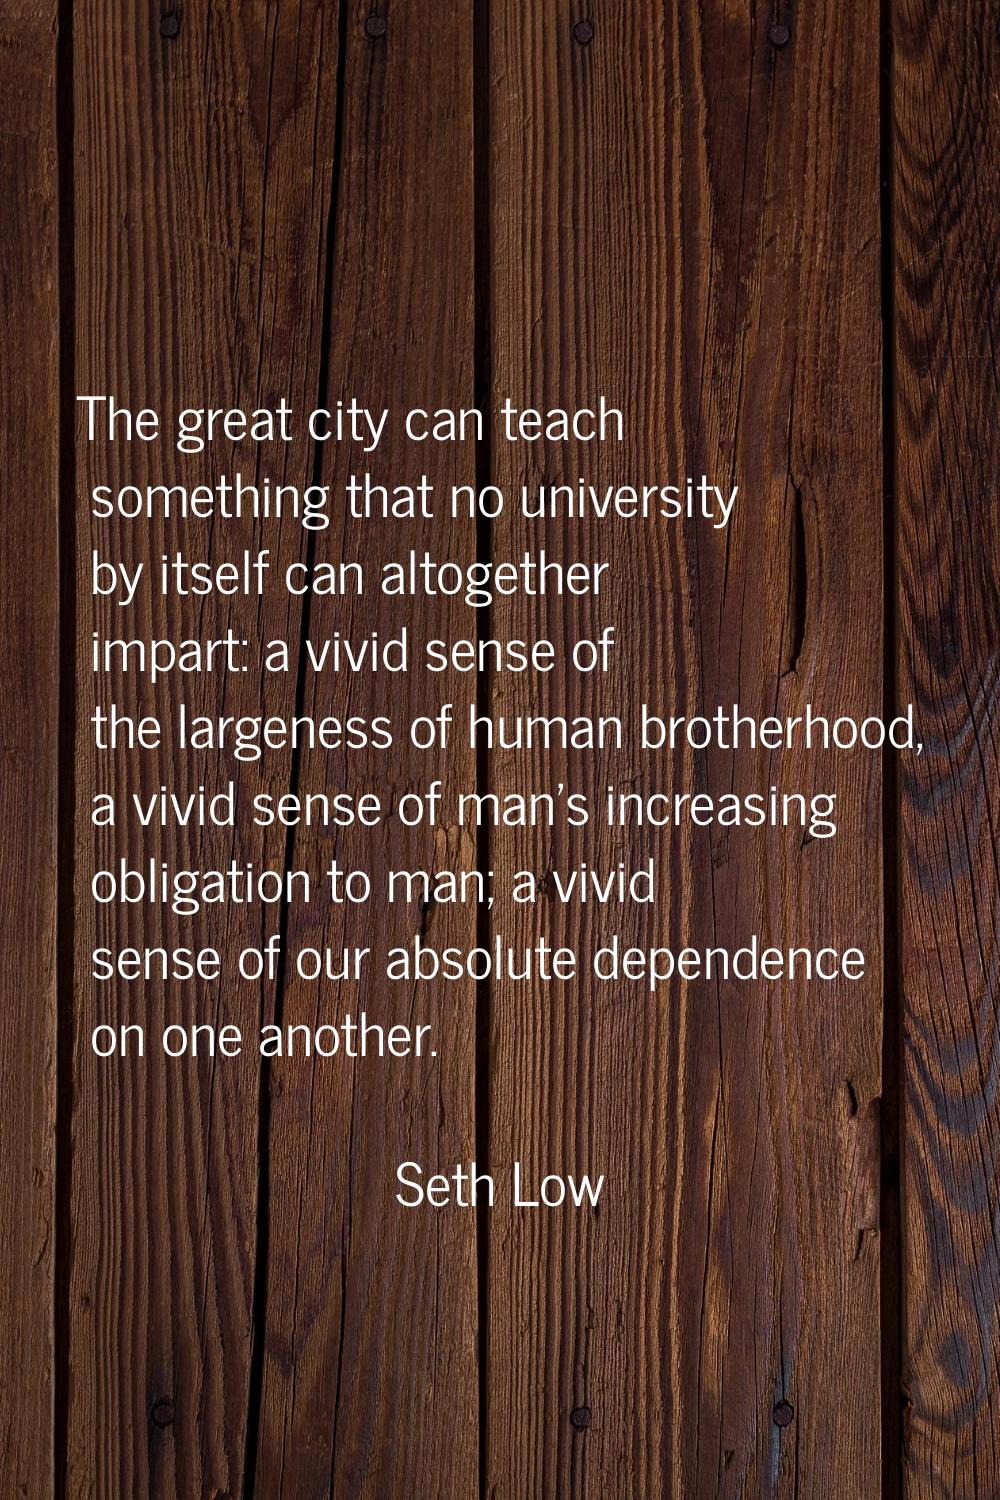 The great city can teach something that no university by itself can altogether impart: a vivid sens